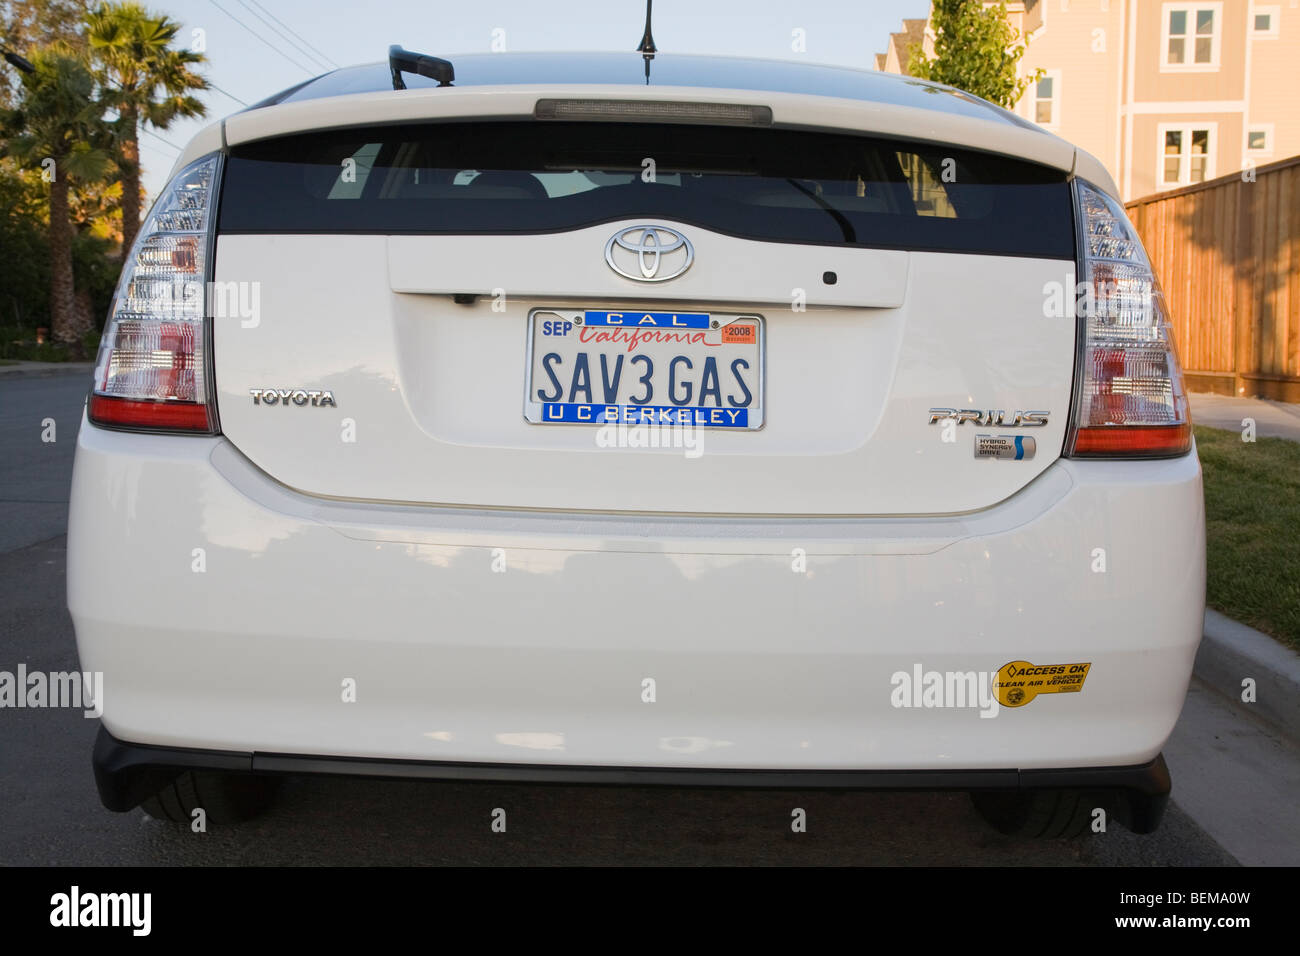 Rear view of white Toyota Prius with a 'SAV3 GAS' (Save Gas) license plate and a clean air vehicle sticker. Stock Photo